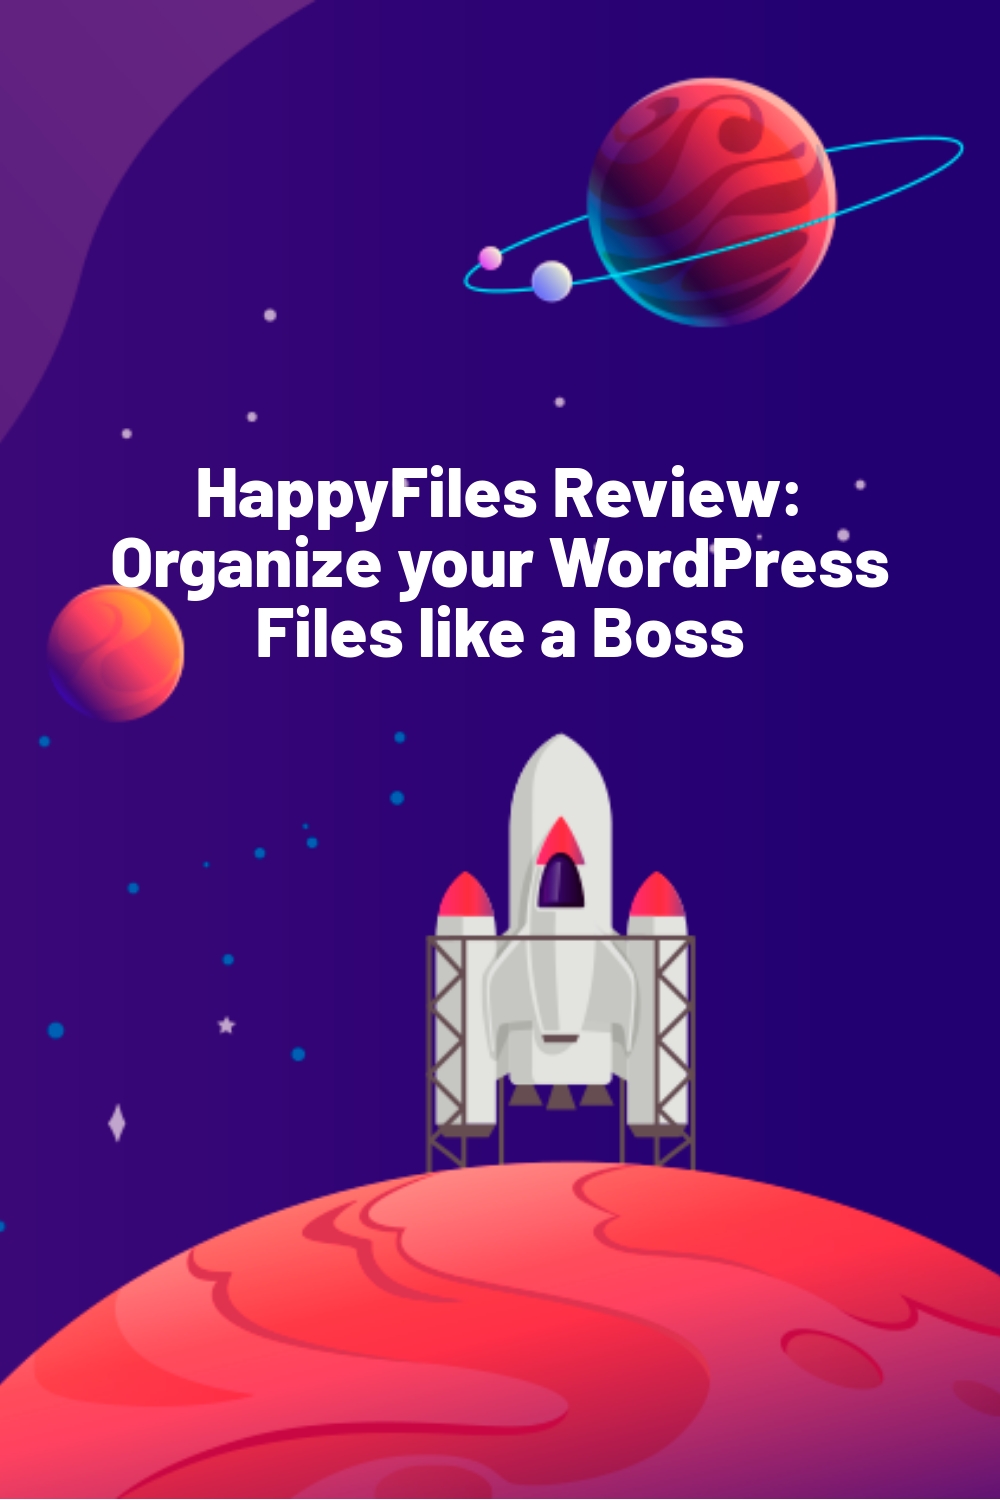 HappyFiles Review: Organize your WordPress Files like a Boss